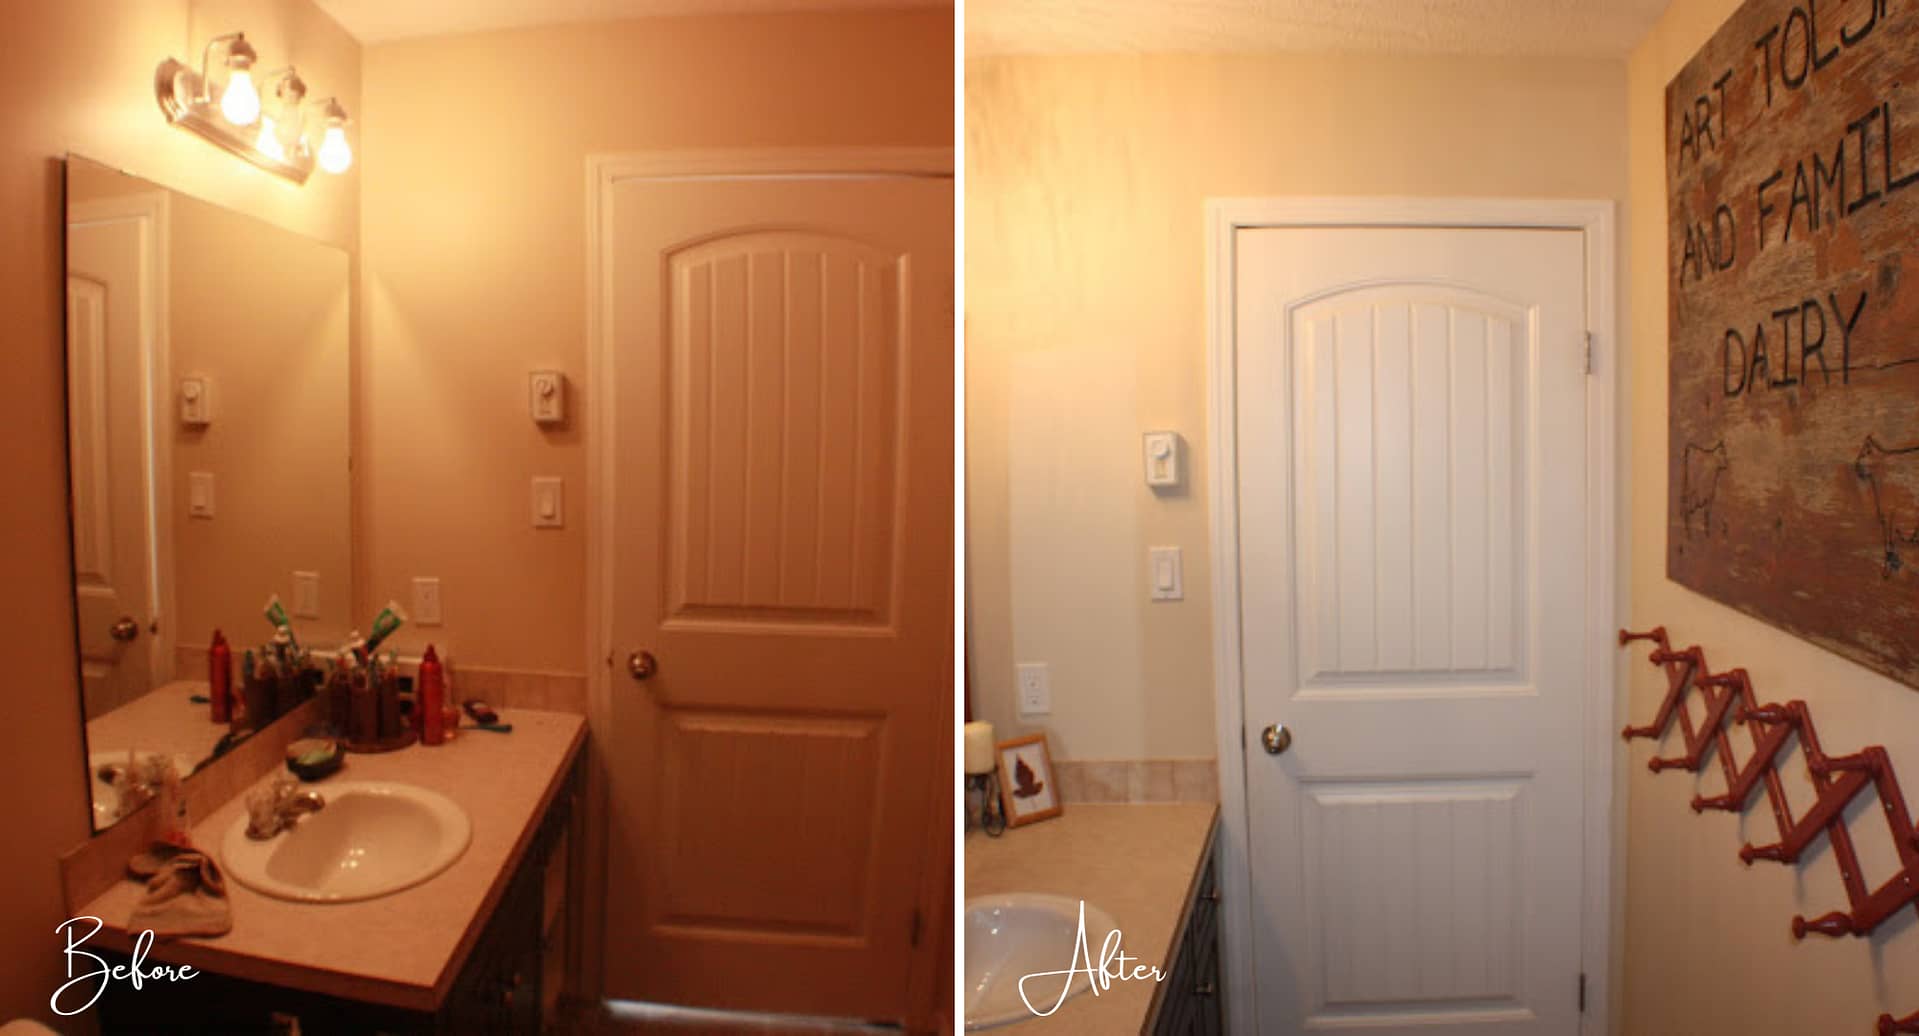 A country makeover of a bathroom, before and after.